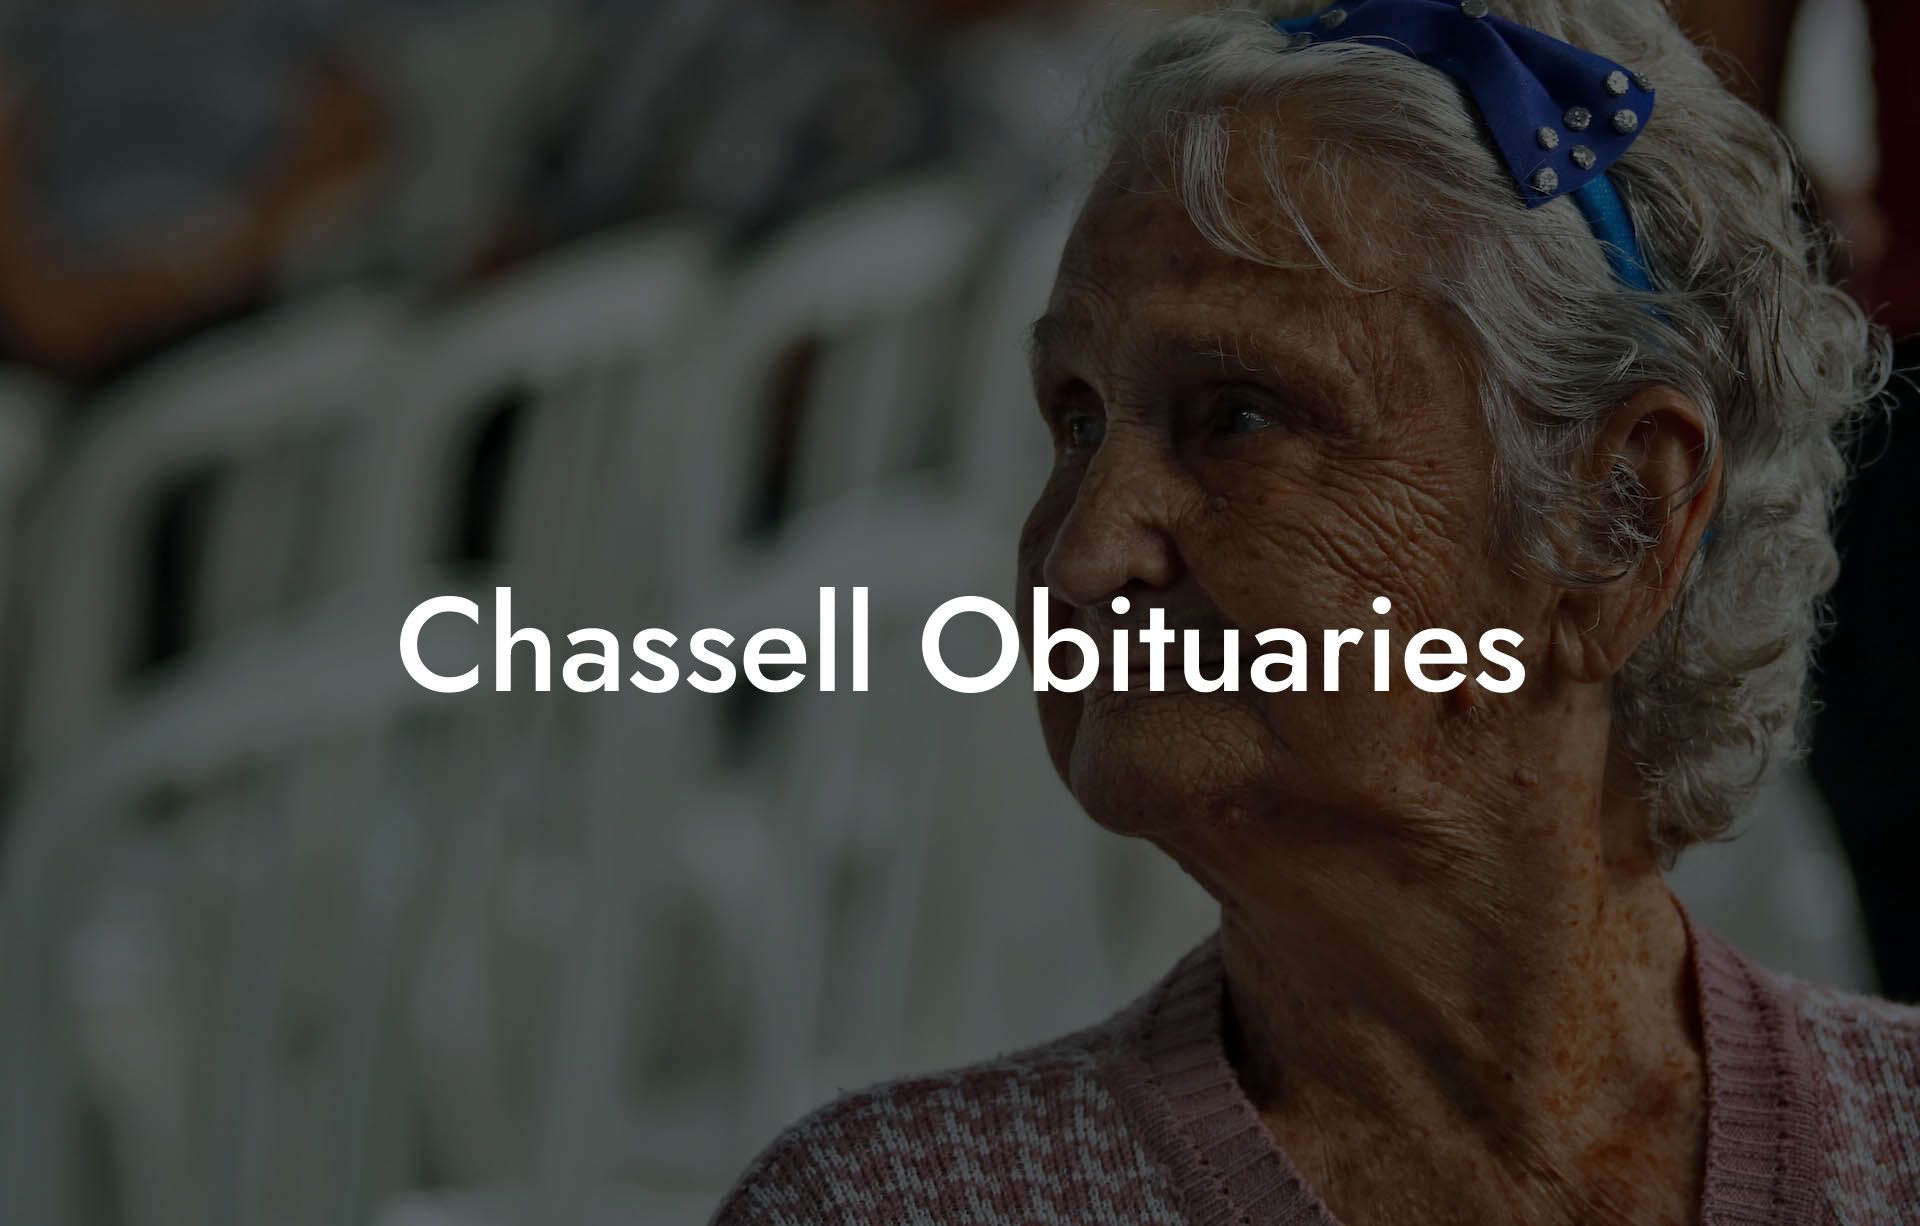 Chassell Obituaries